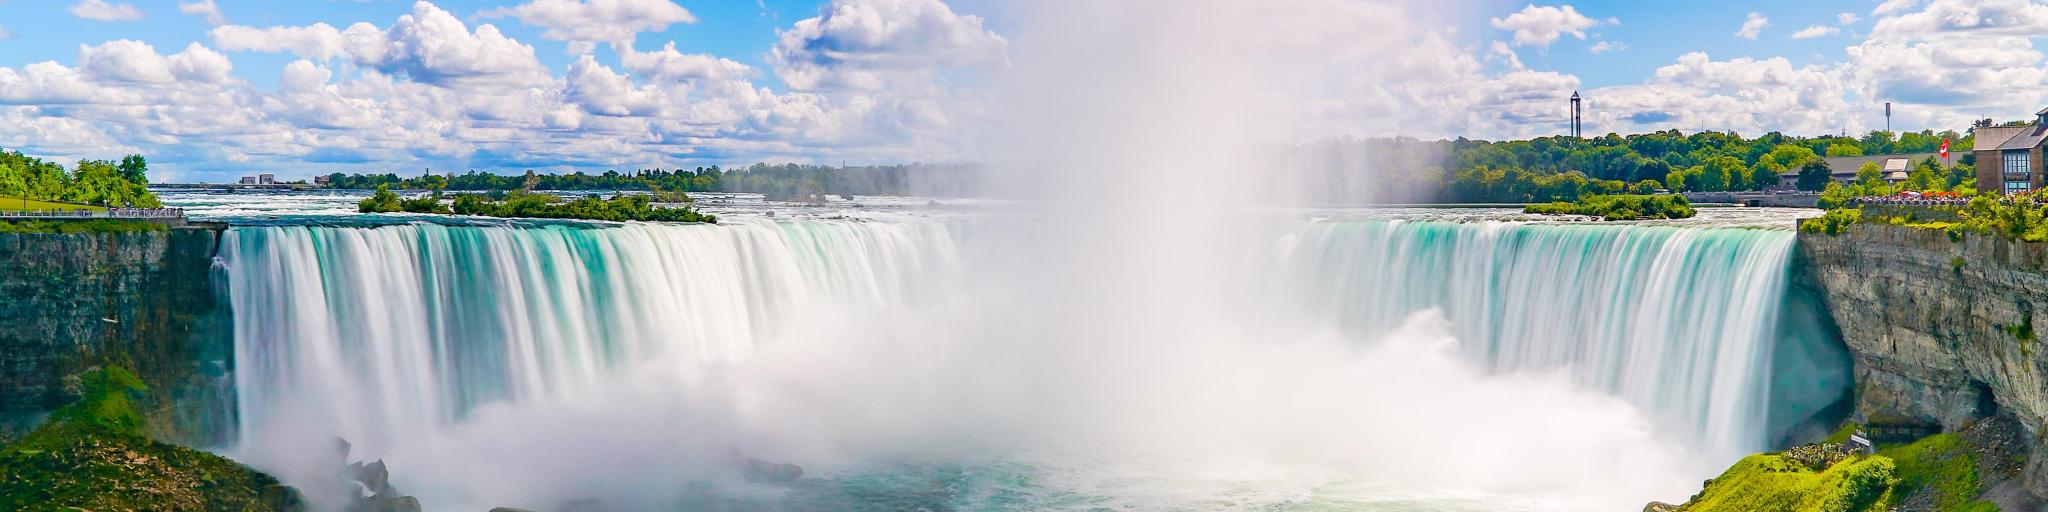 The amazing Niagara Falls is renowned for its beauty and is the collective name for three waterfalls that straddle the international border between Canada and the USA